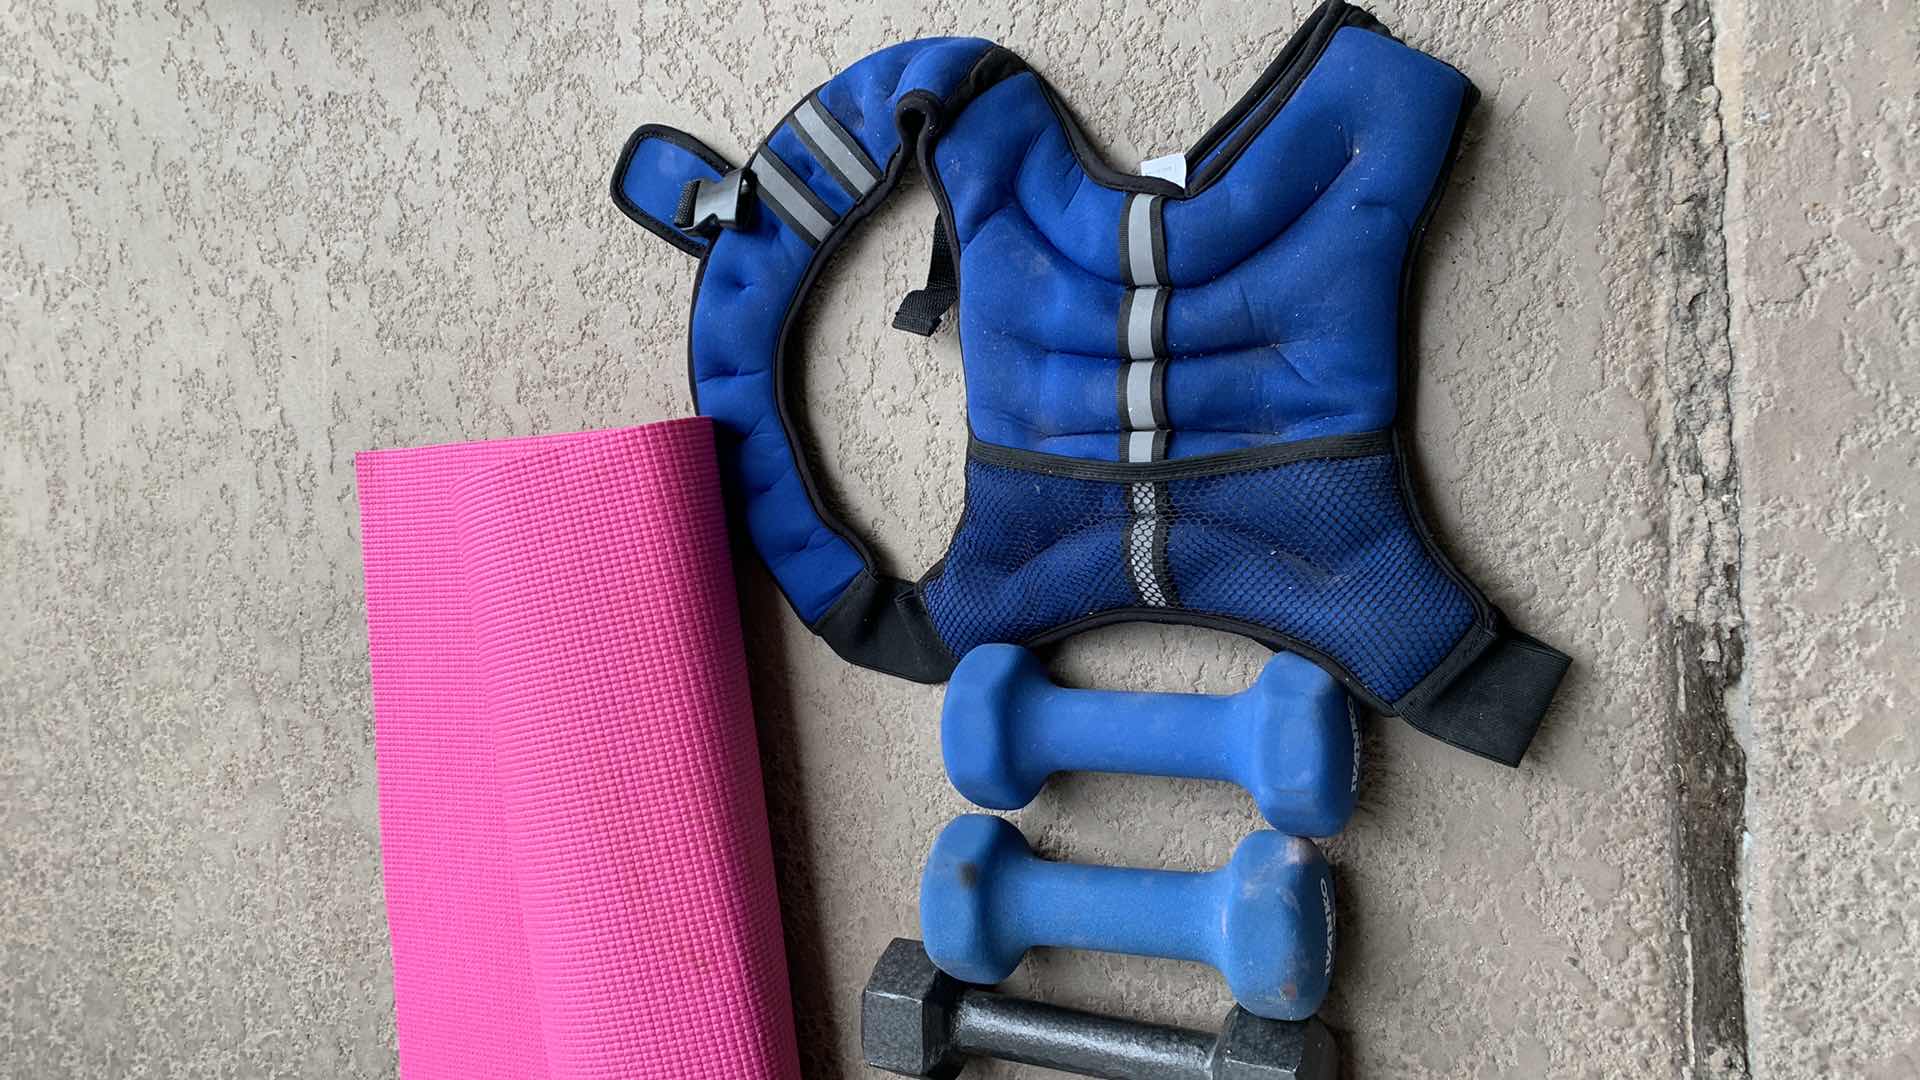 Photo 2 of DUMBBELLS, WEIGHTED BELT, AND YOGA MAT